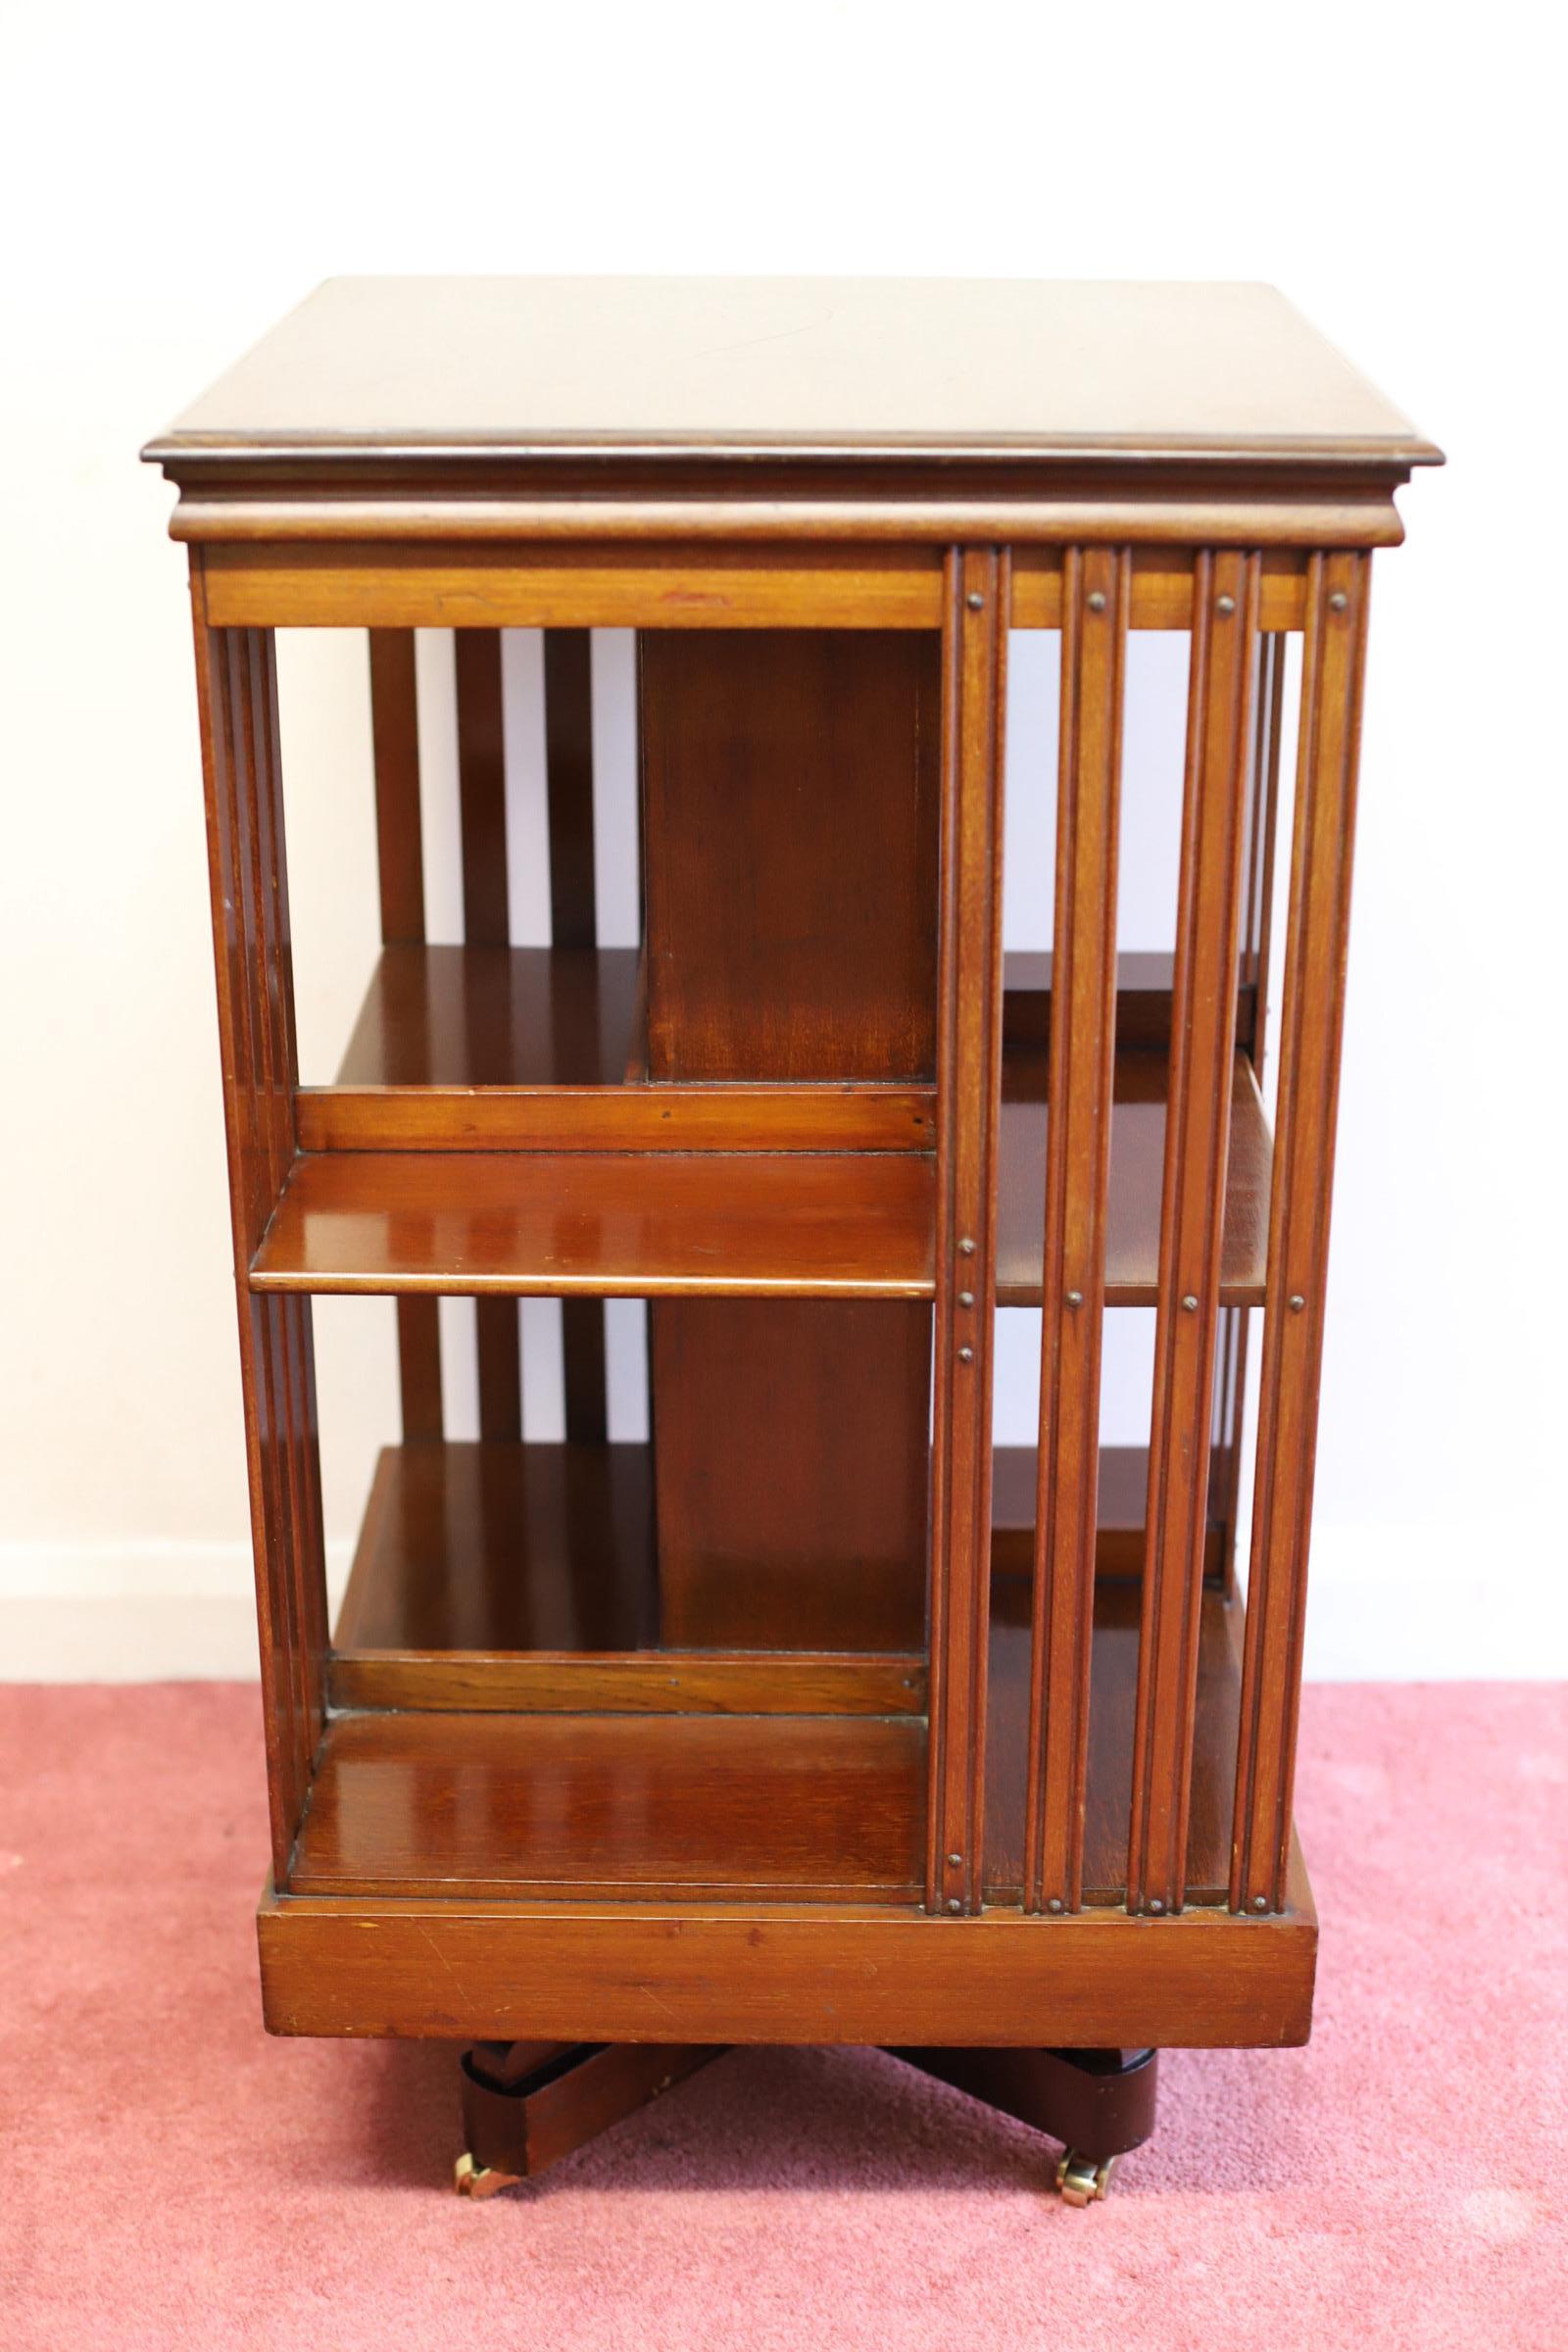 This lovely antique bookcase is a charming addition to any antique furniture collection. Crafted from beautiful mahogany wood, this two-shelved bookcase is designed to revolve, making it both practical and aesthetically pleasing. Its petite size,